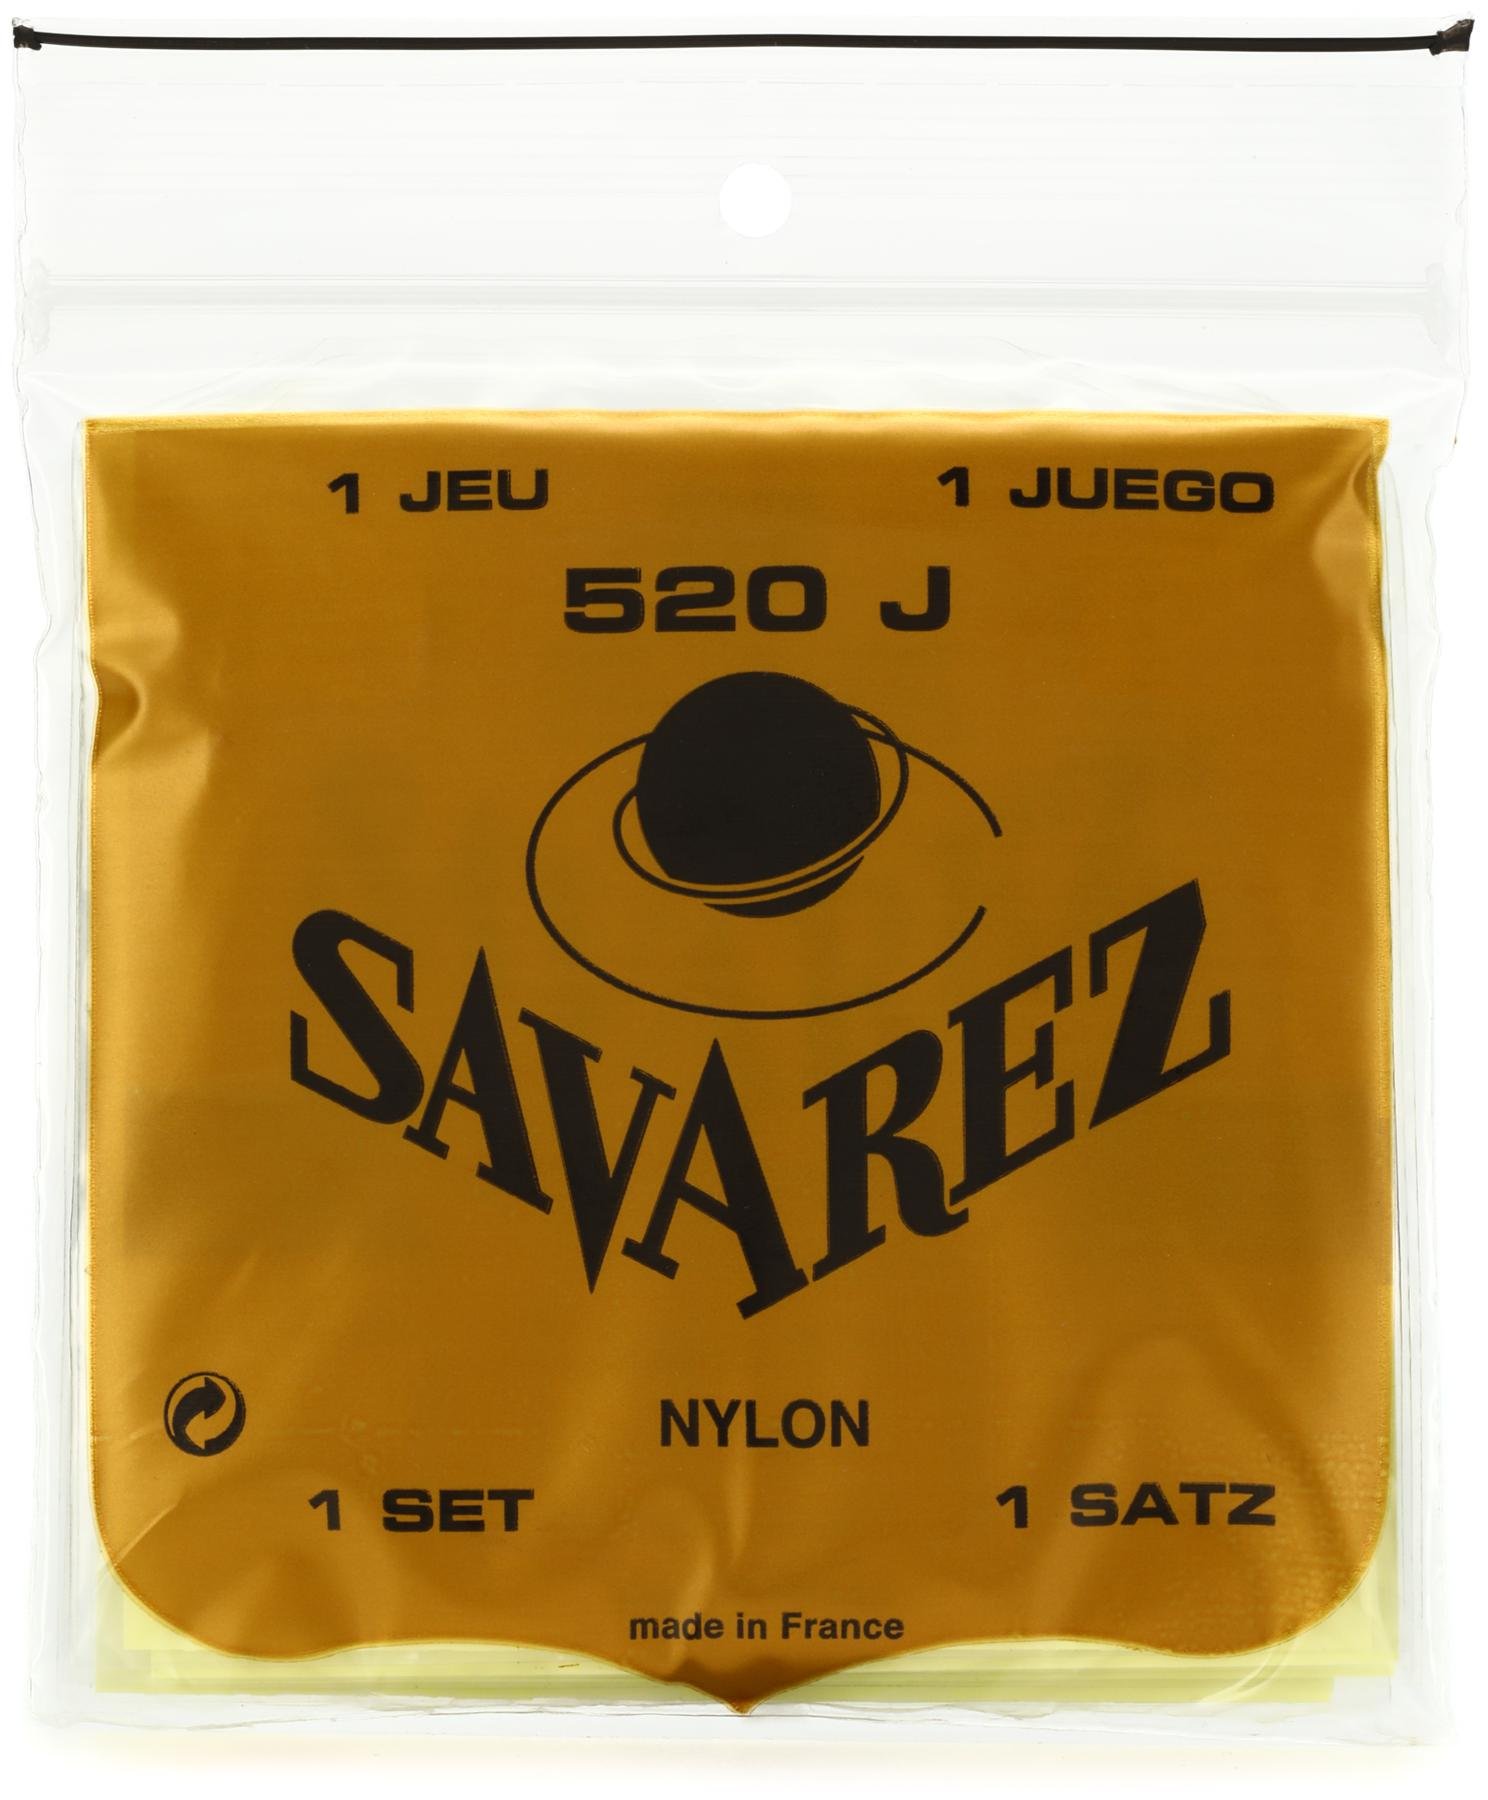 Rectified Nylon High Tension Classical Guitar Strings Savarez Improved. Improved - None.